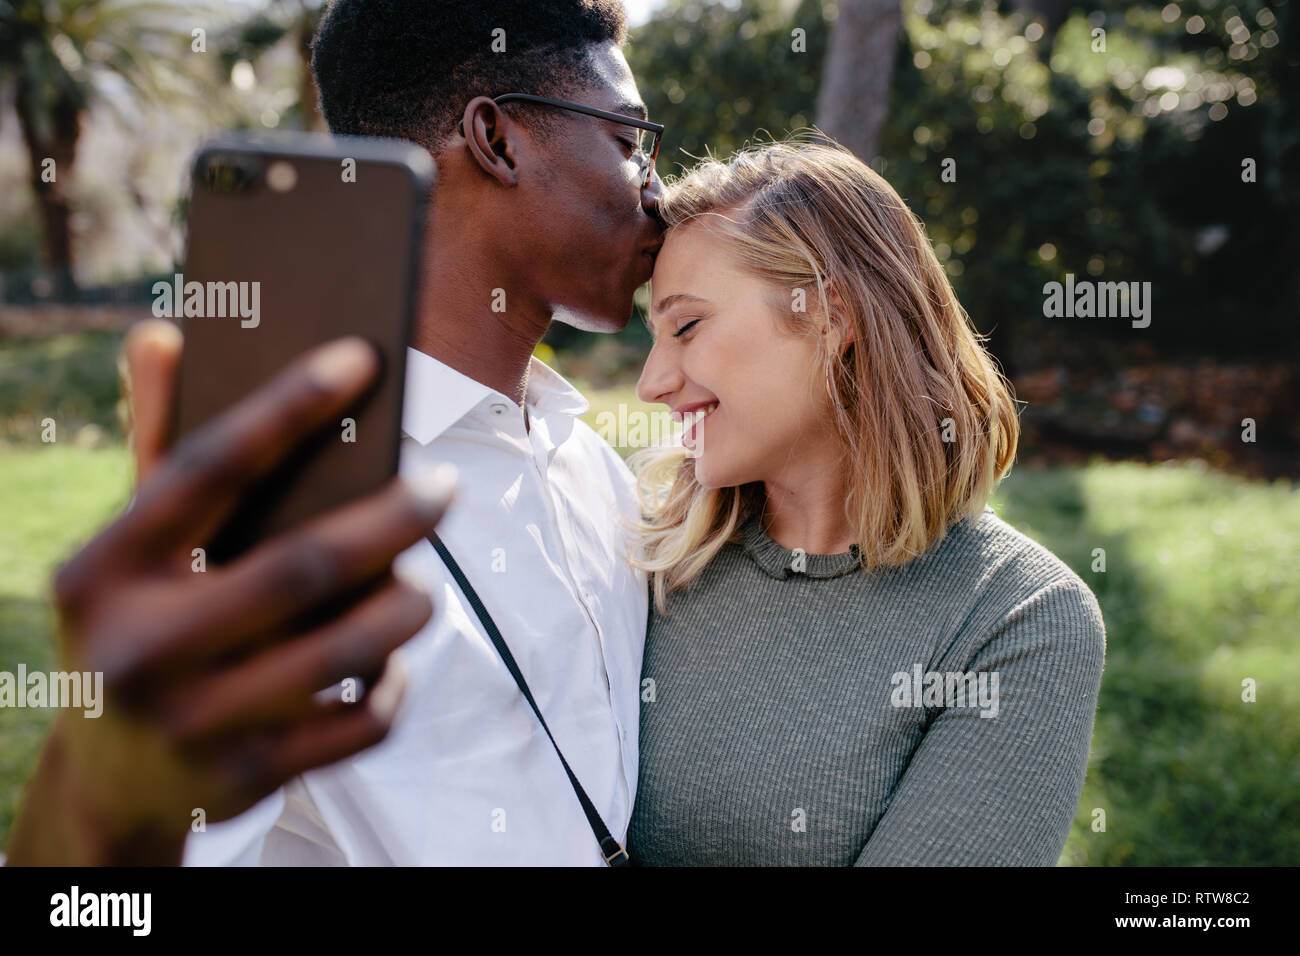 Loving couple taking selfie with smart phone outdoors. Man kissing on forehead of his girlfriend while taking self portrait. Stock Photo